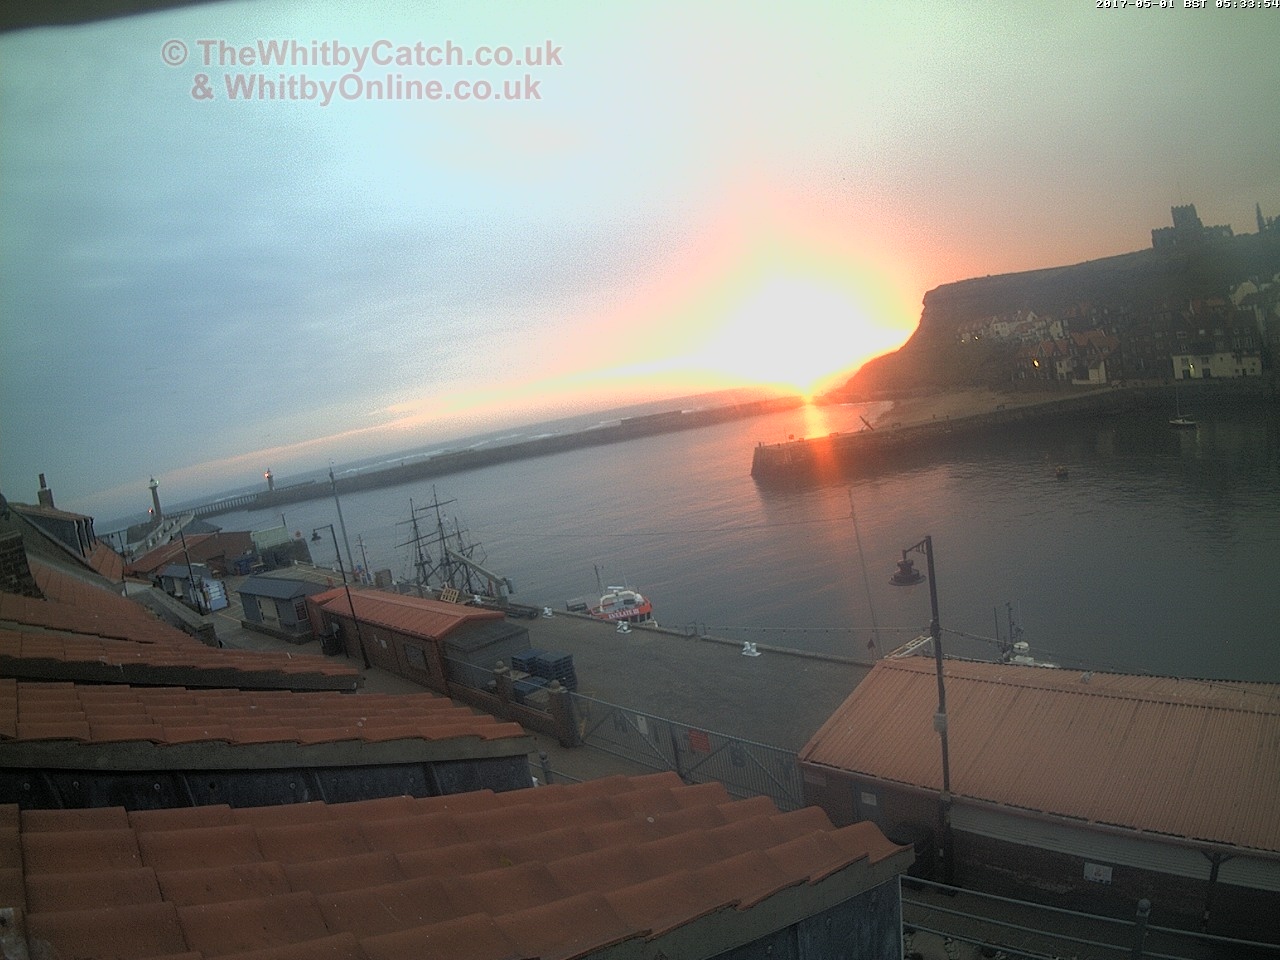 Whitby Mon 1st May 2017 05:34.